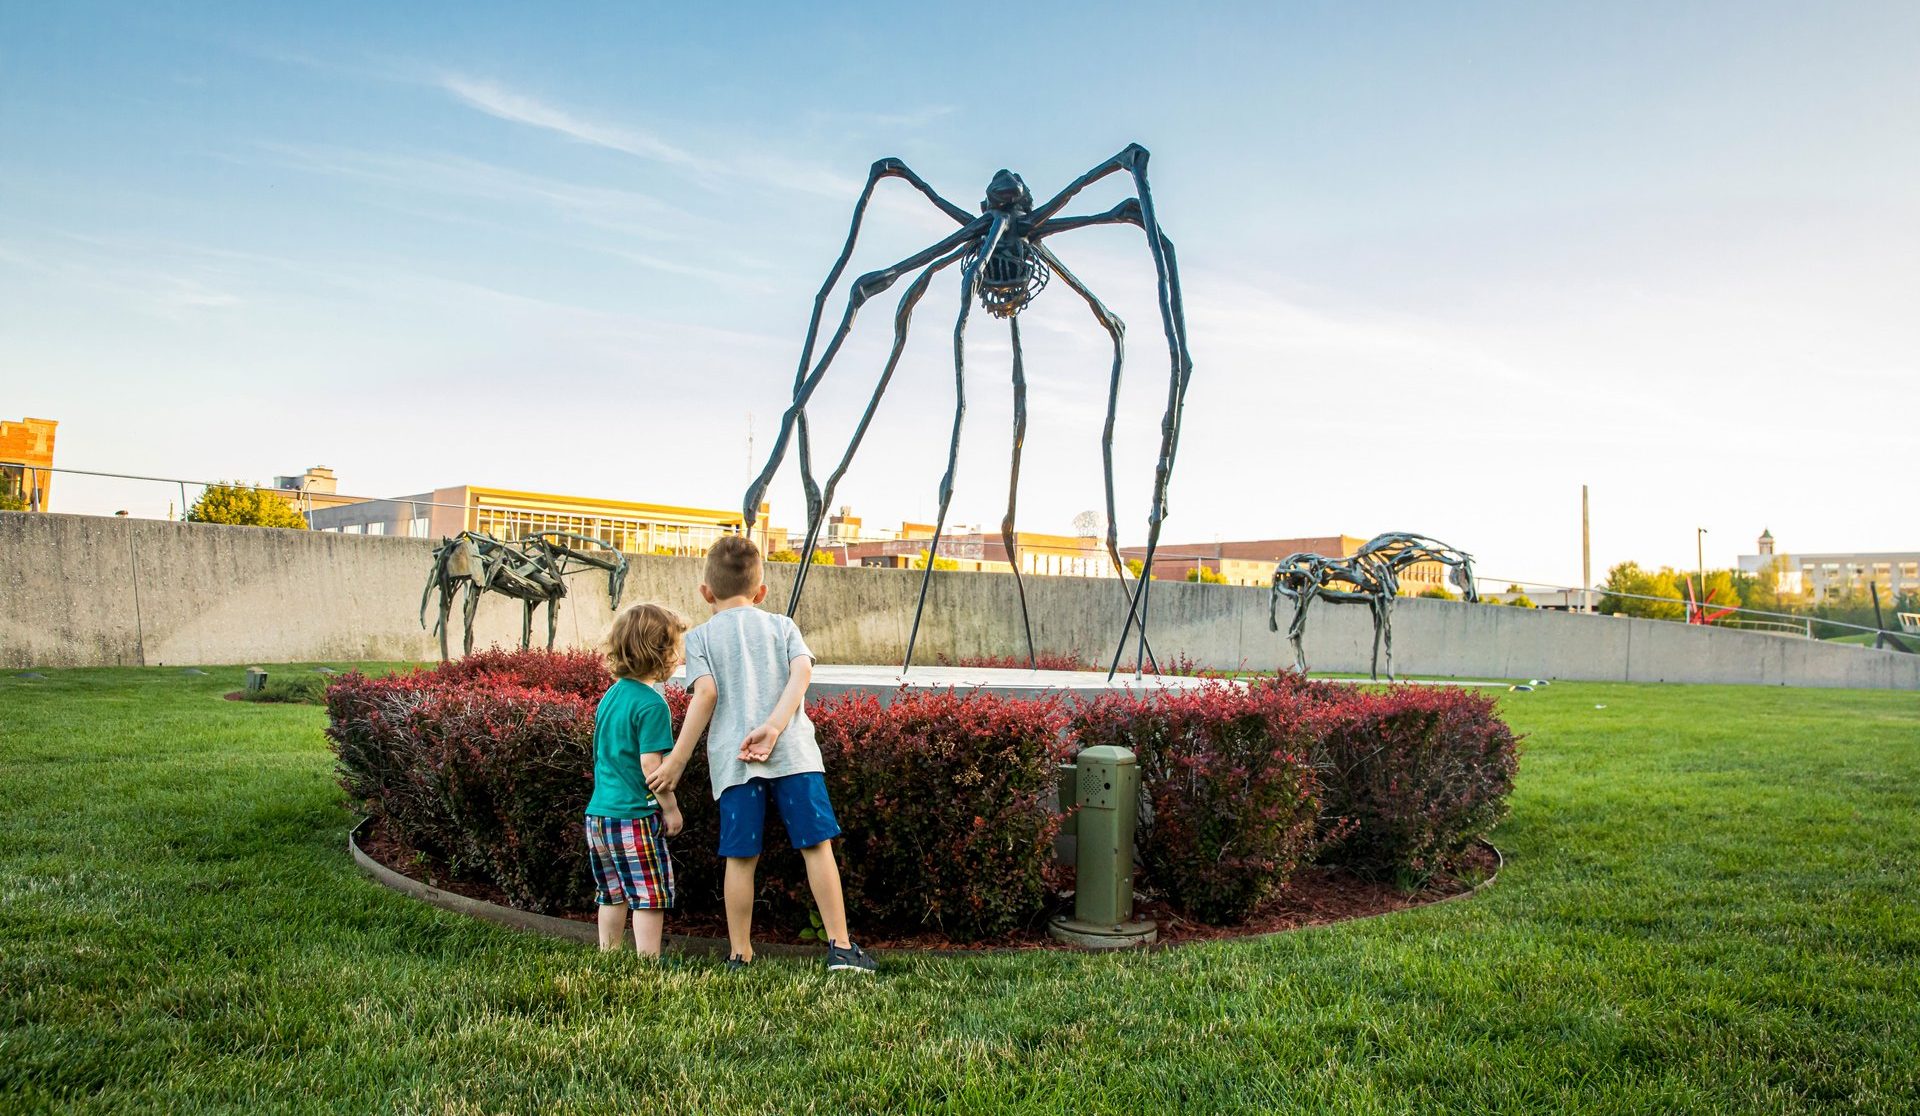 kids viewing a sculpture of a large insect at the poppajohn sculpture park in des moines iowa